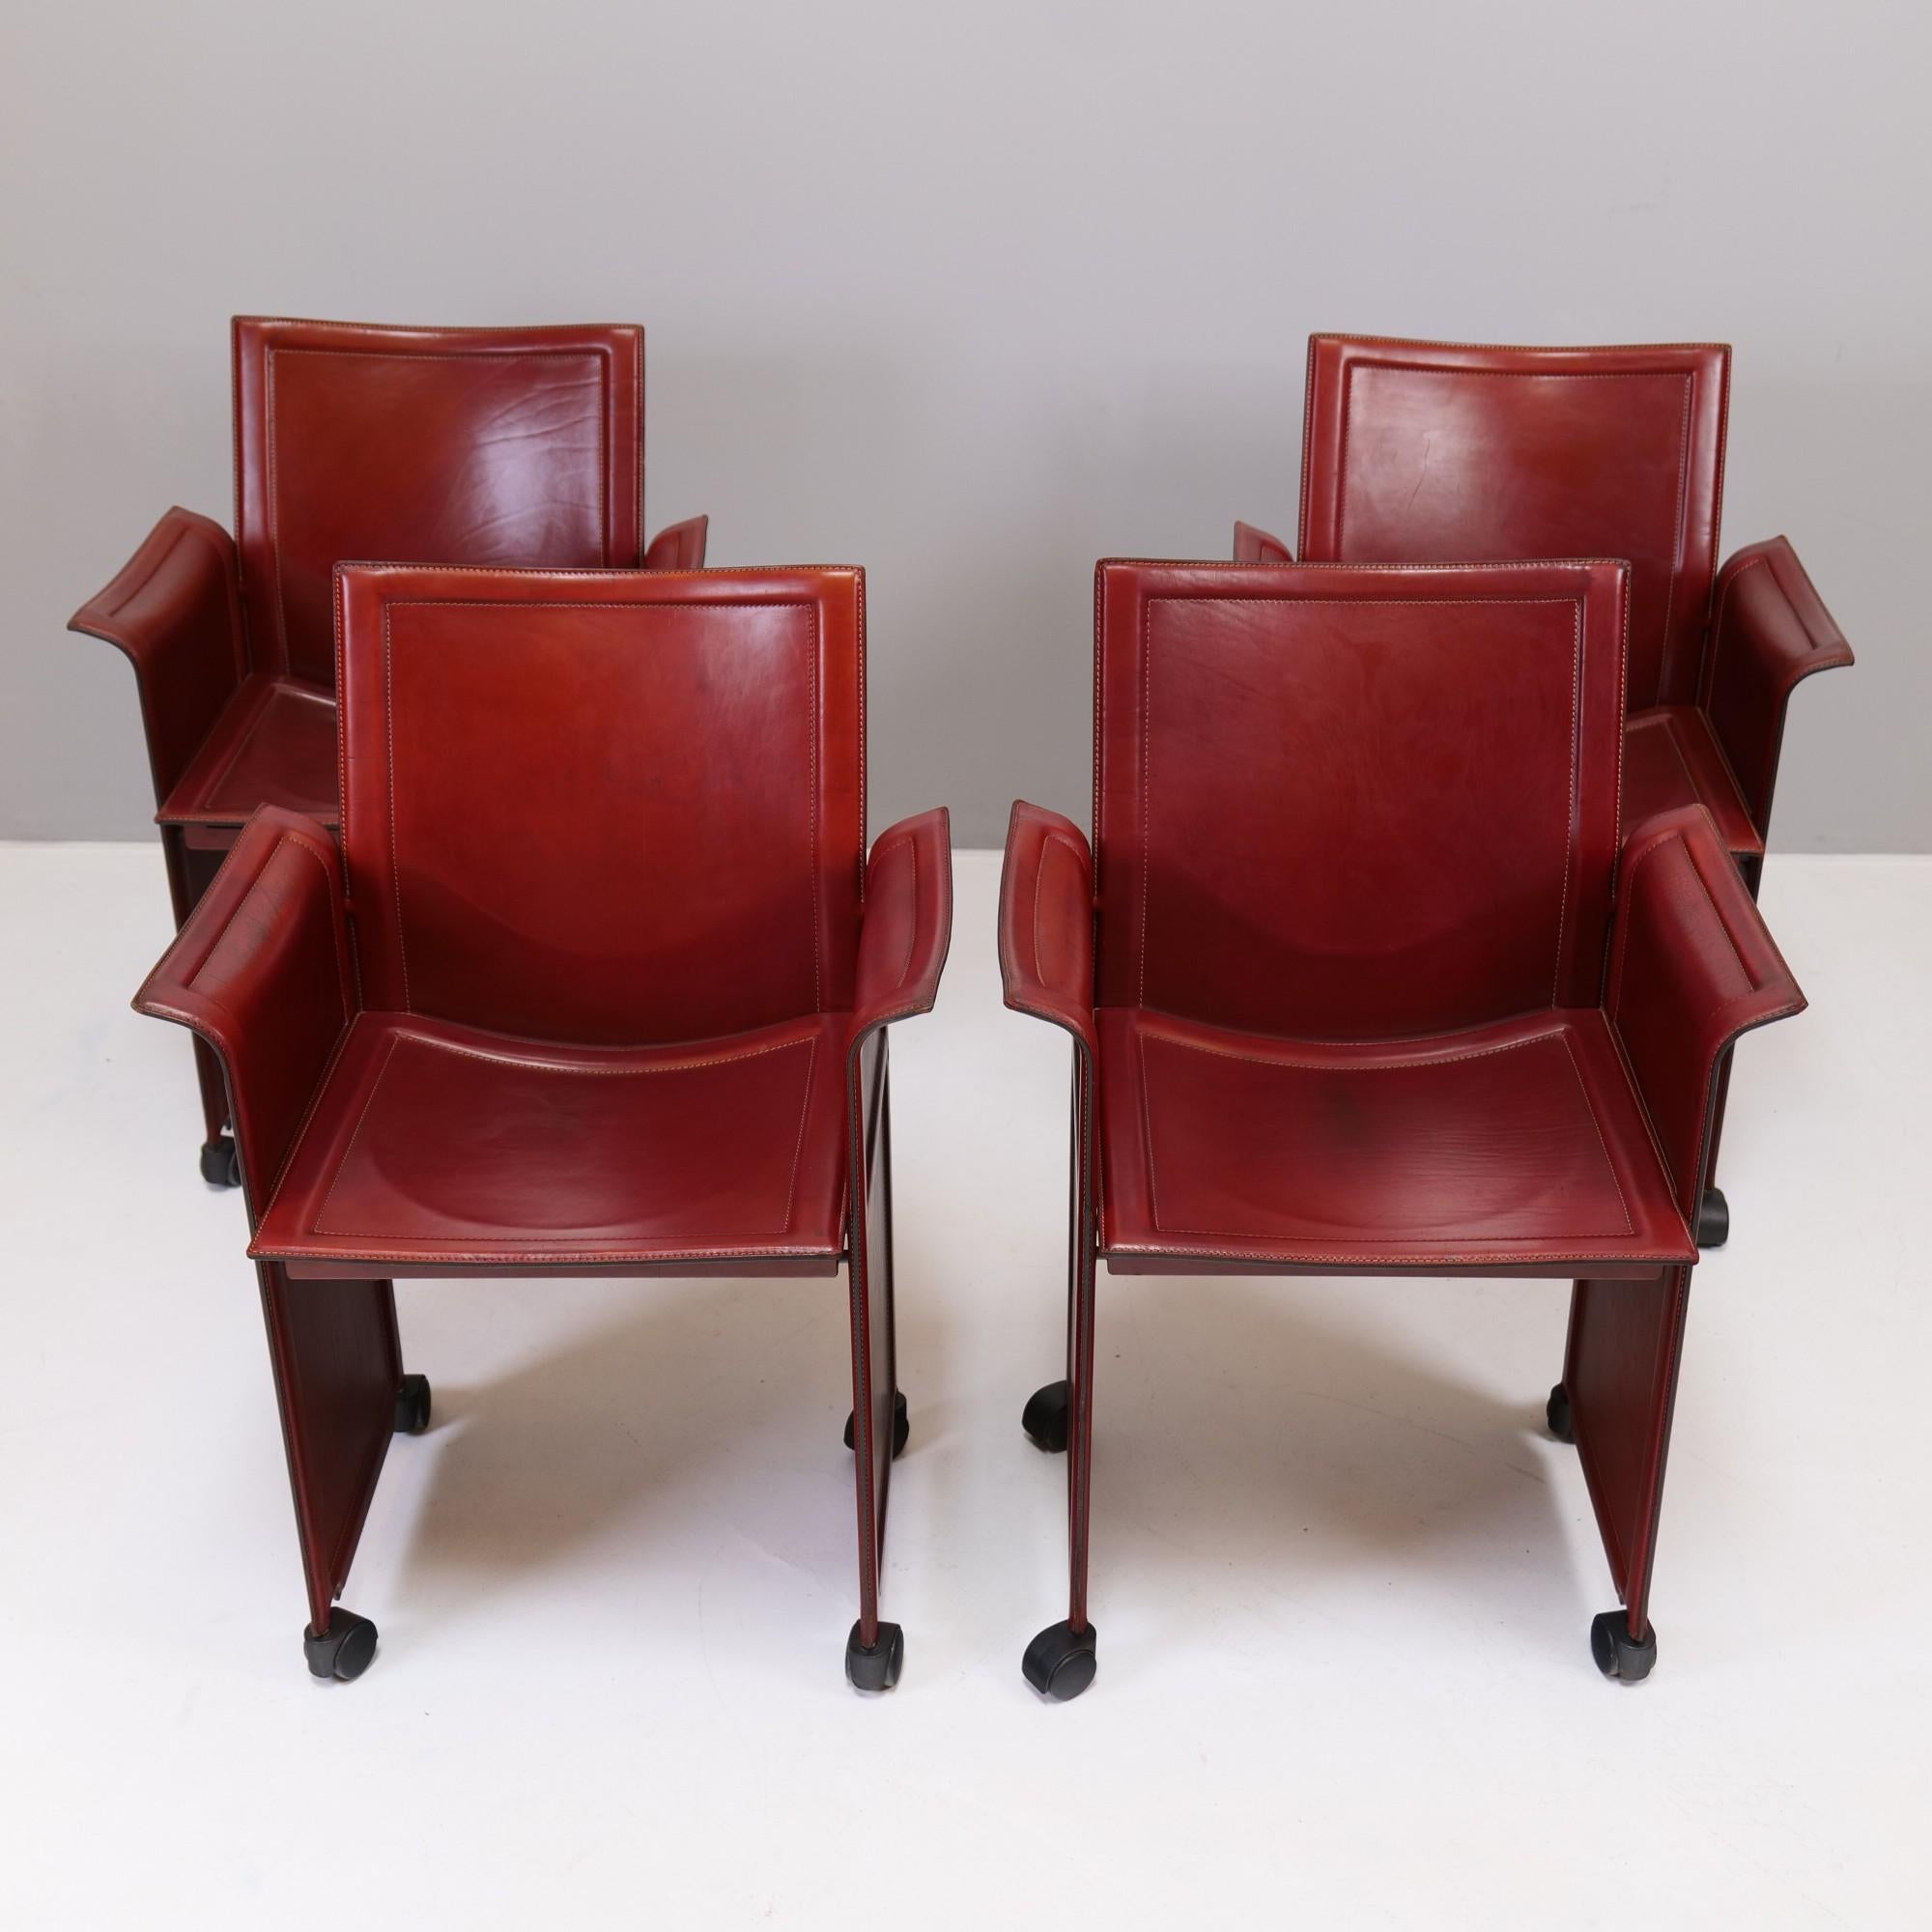 vintage Matteo Grassi set of 4 leather armchairs.